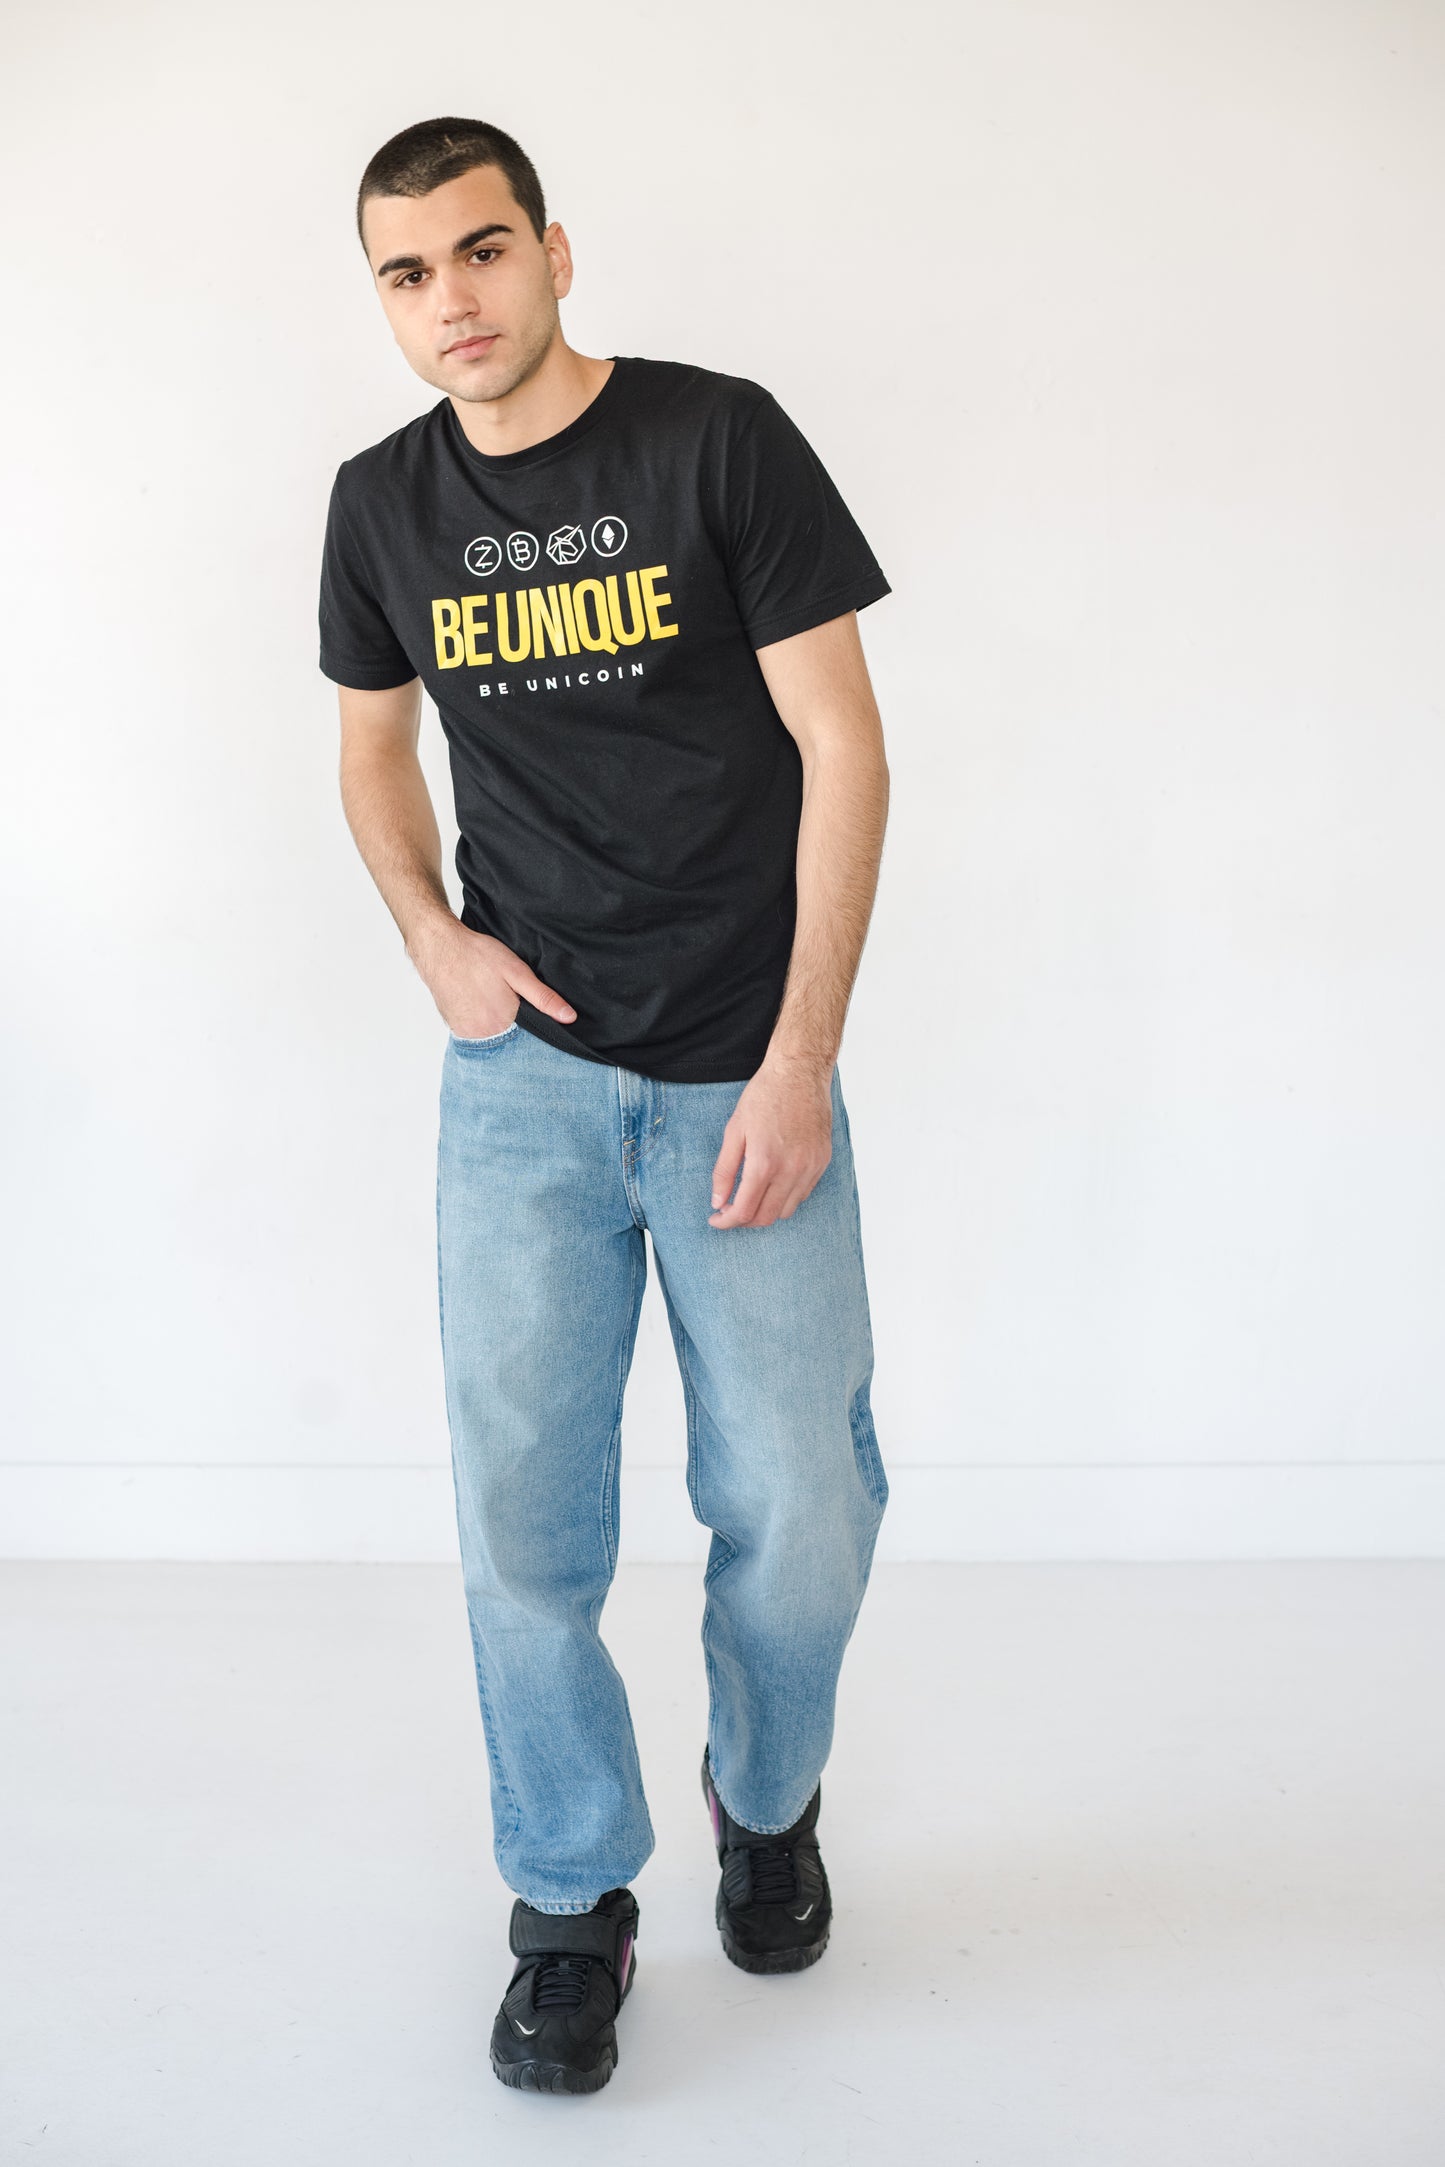 be unique, tshirt for crypto users,  Tshirt for crypto users, Upgrade your wardrobe with our luxurious premium organic cotton tees, crafted for unbeatable comfort and timeless elegance. Made from 100% organic cotton, these short-sleeve tees are machine washable for easy care. Enjoy a soft touch and elevate your everyday style effortlessly.